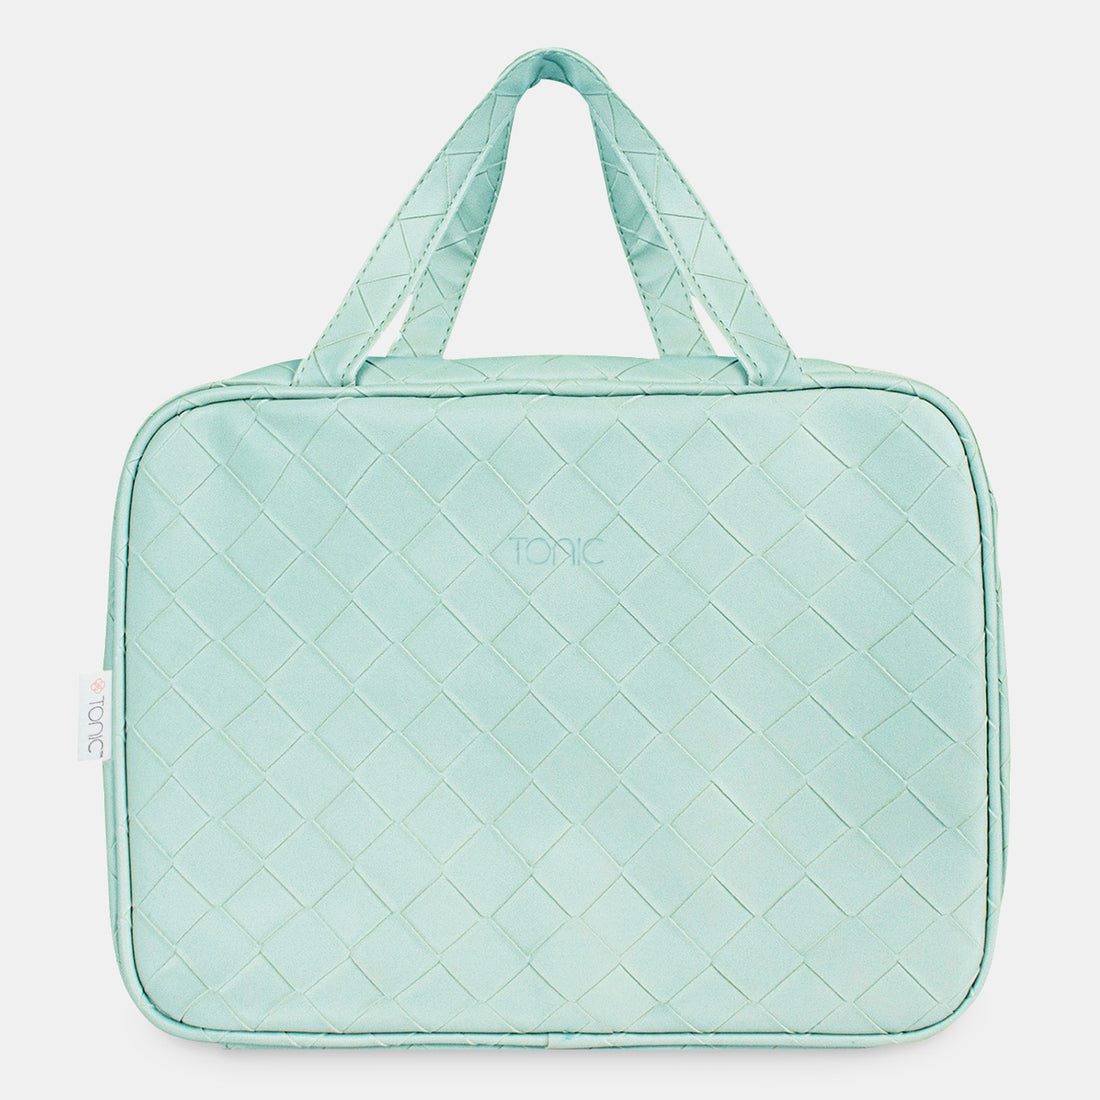 Hanging Cosmetic Bag - Woven Teal